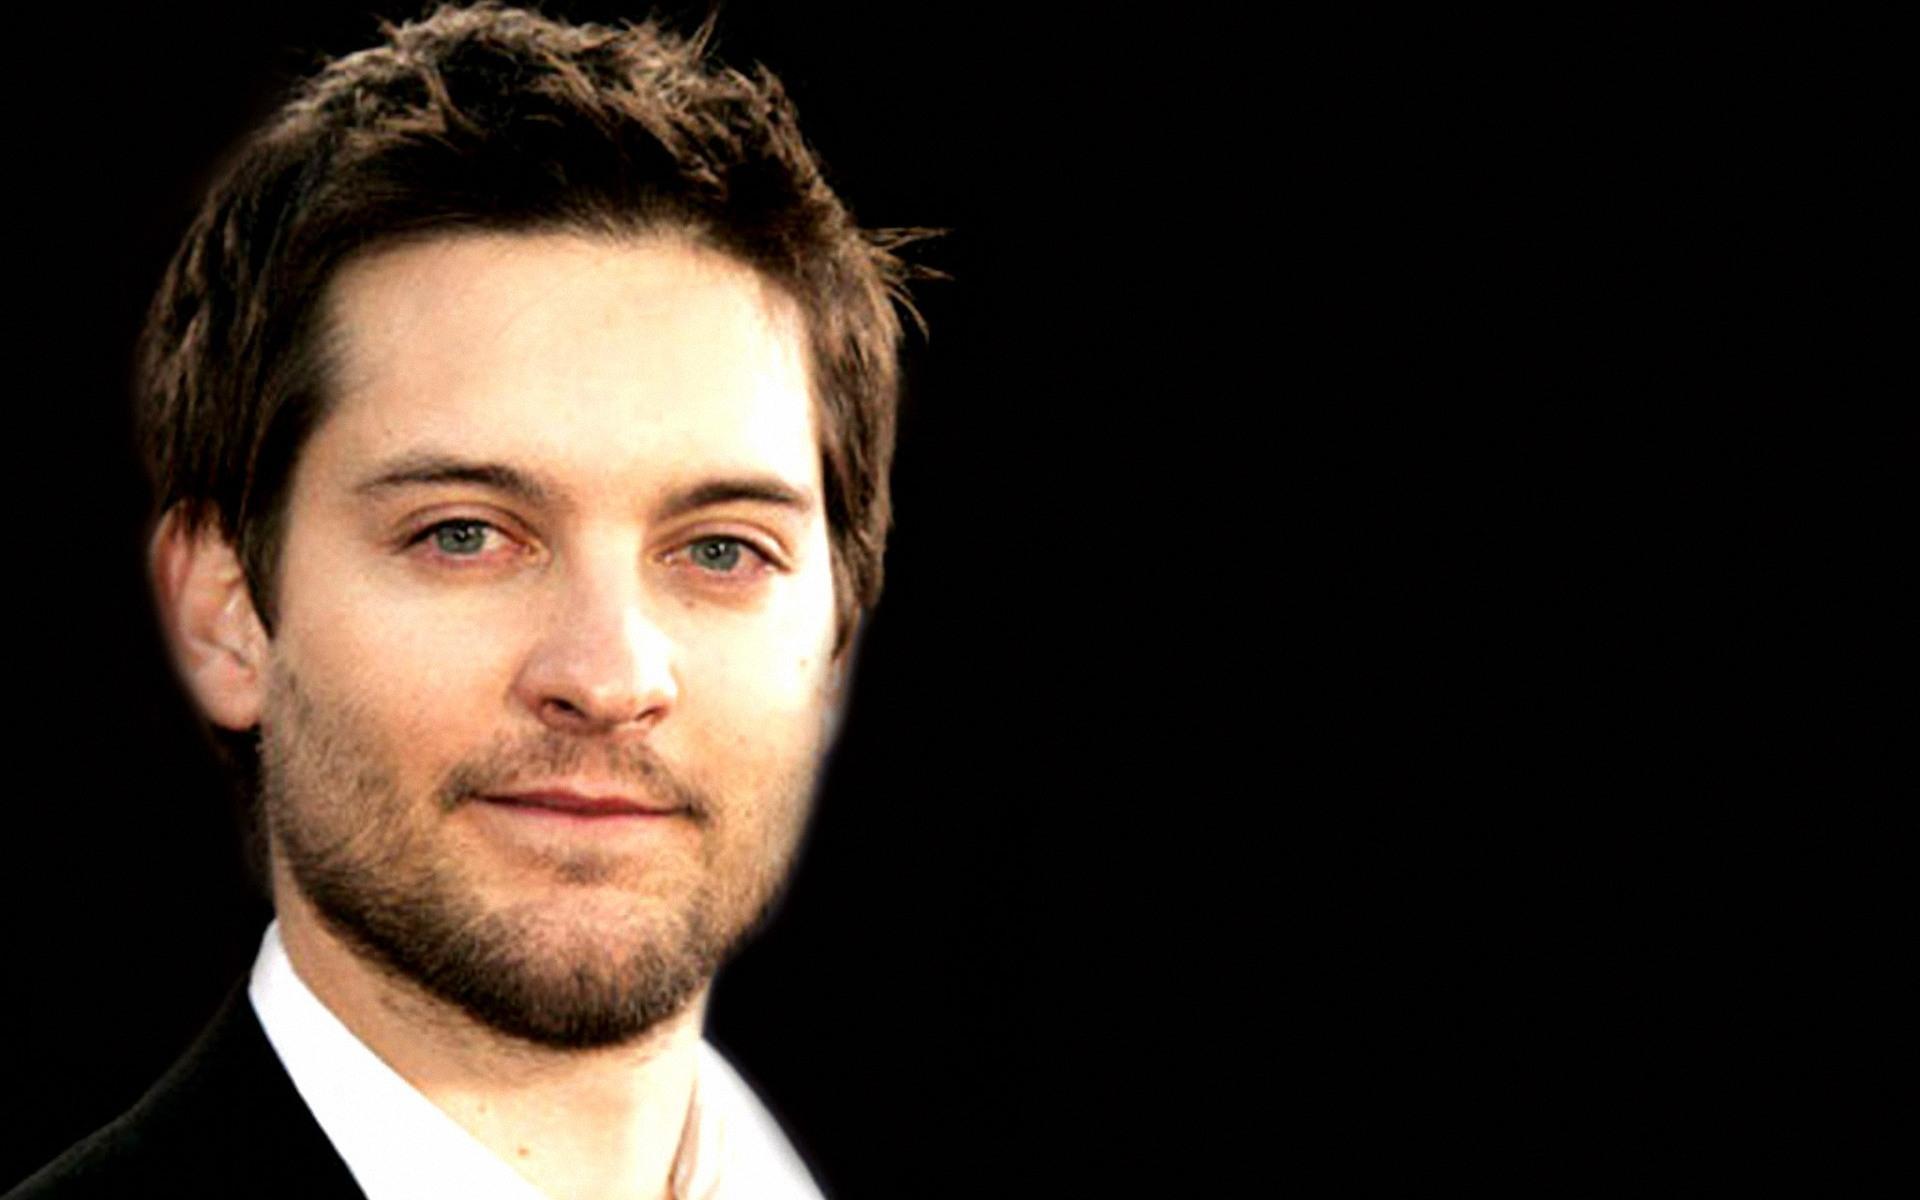 Pin Tobey Maguire 1152x864 Wallpapers.